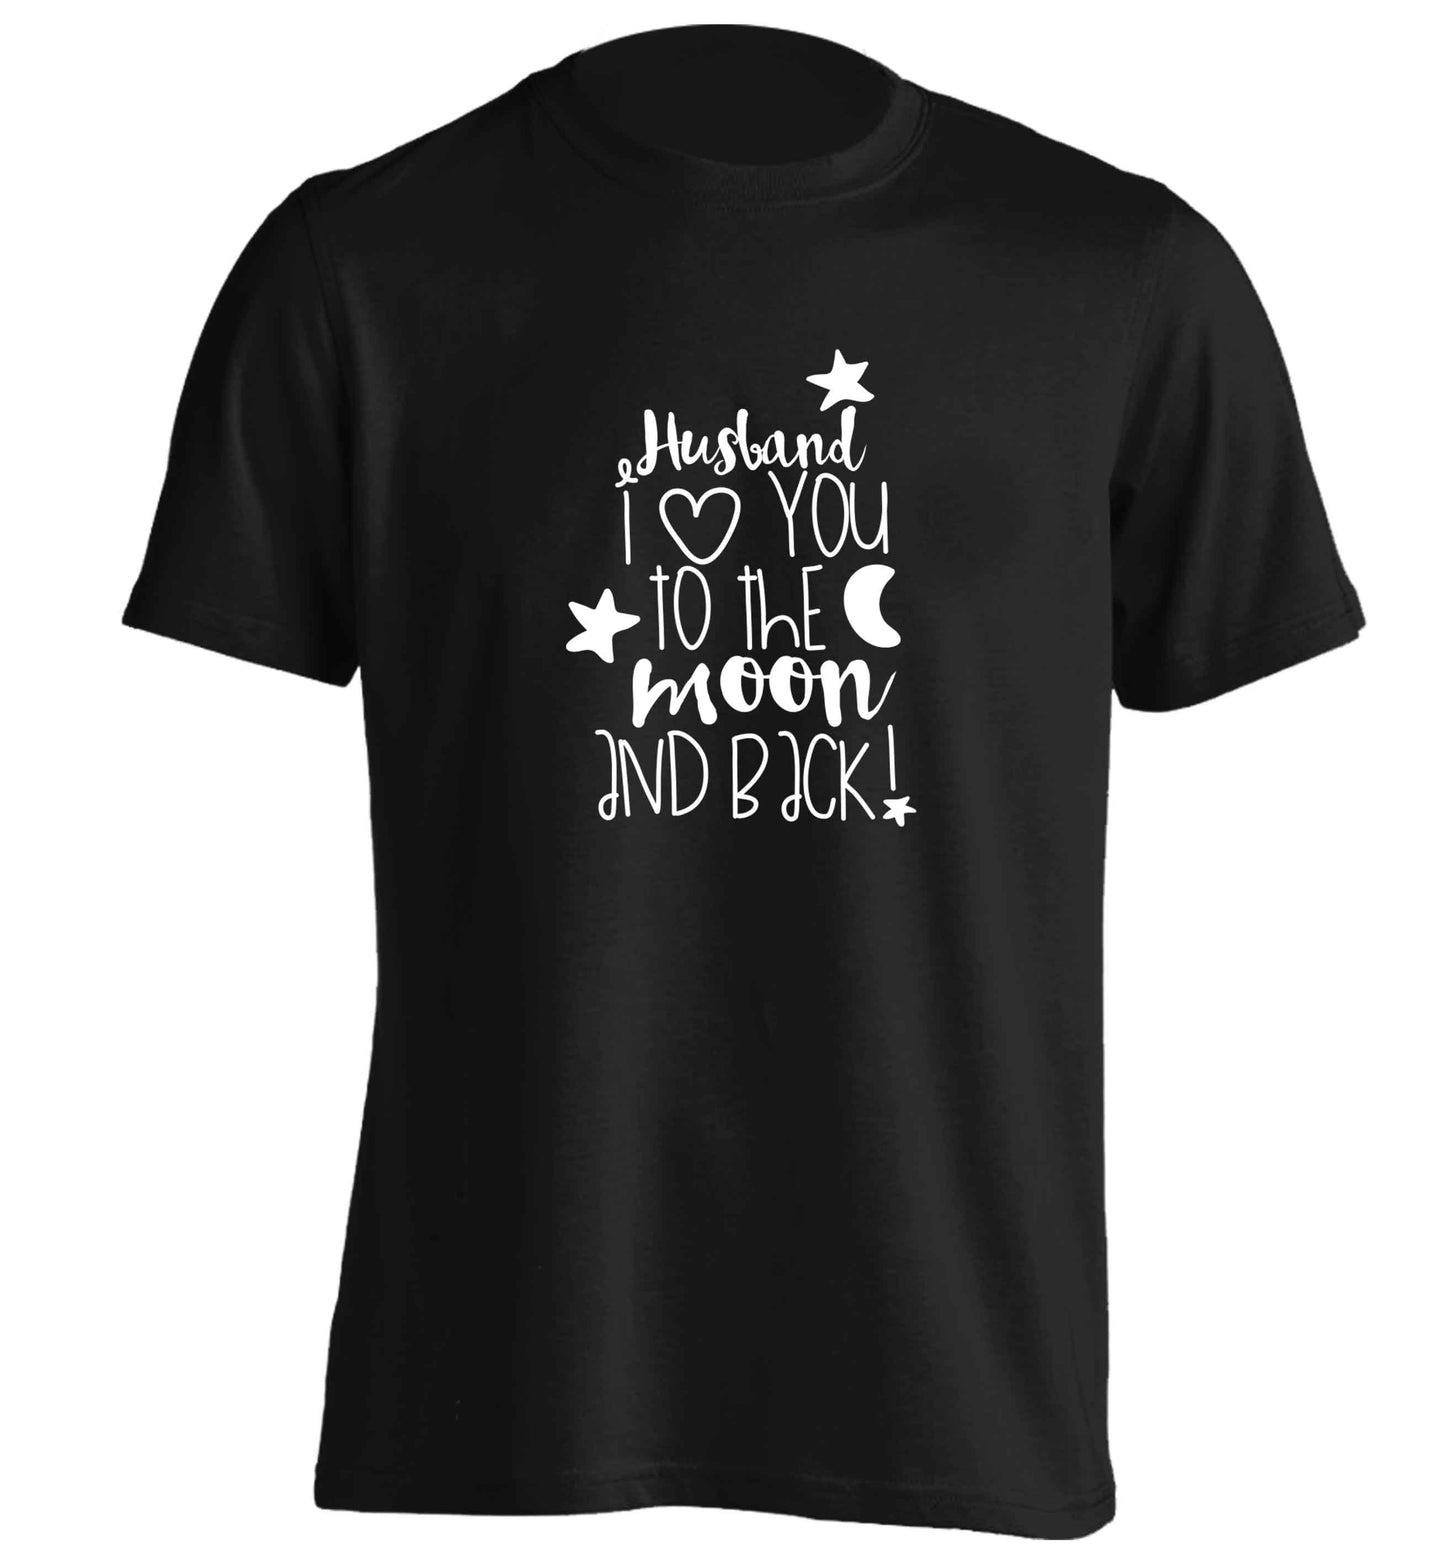 Husband I love you to the moon and back adults unisex black Tshirt 2XL